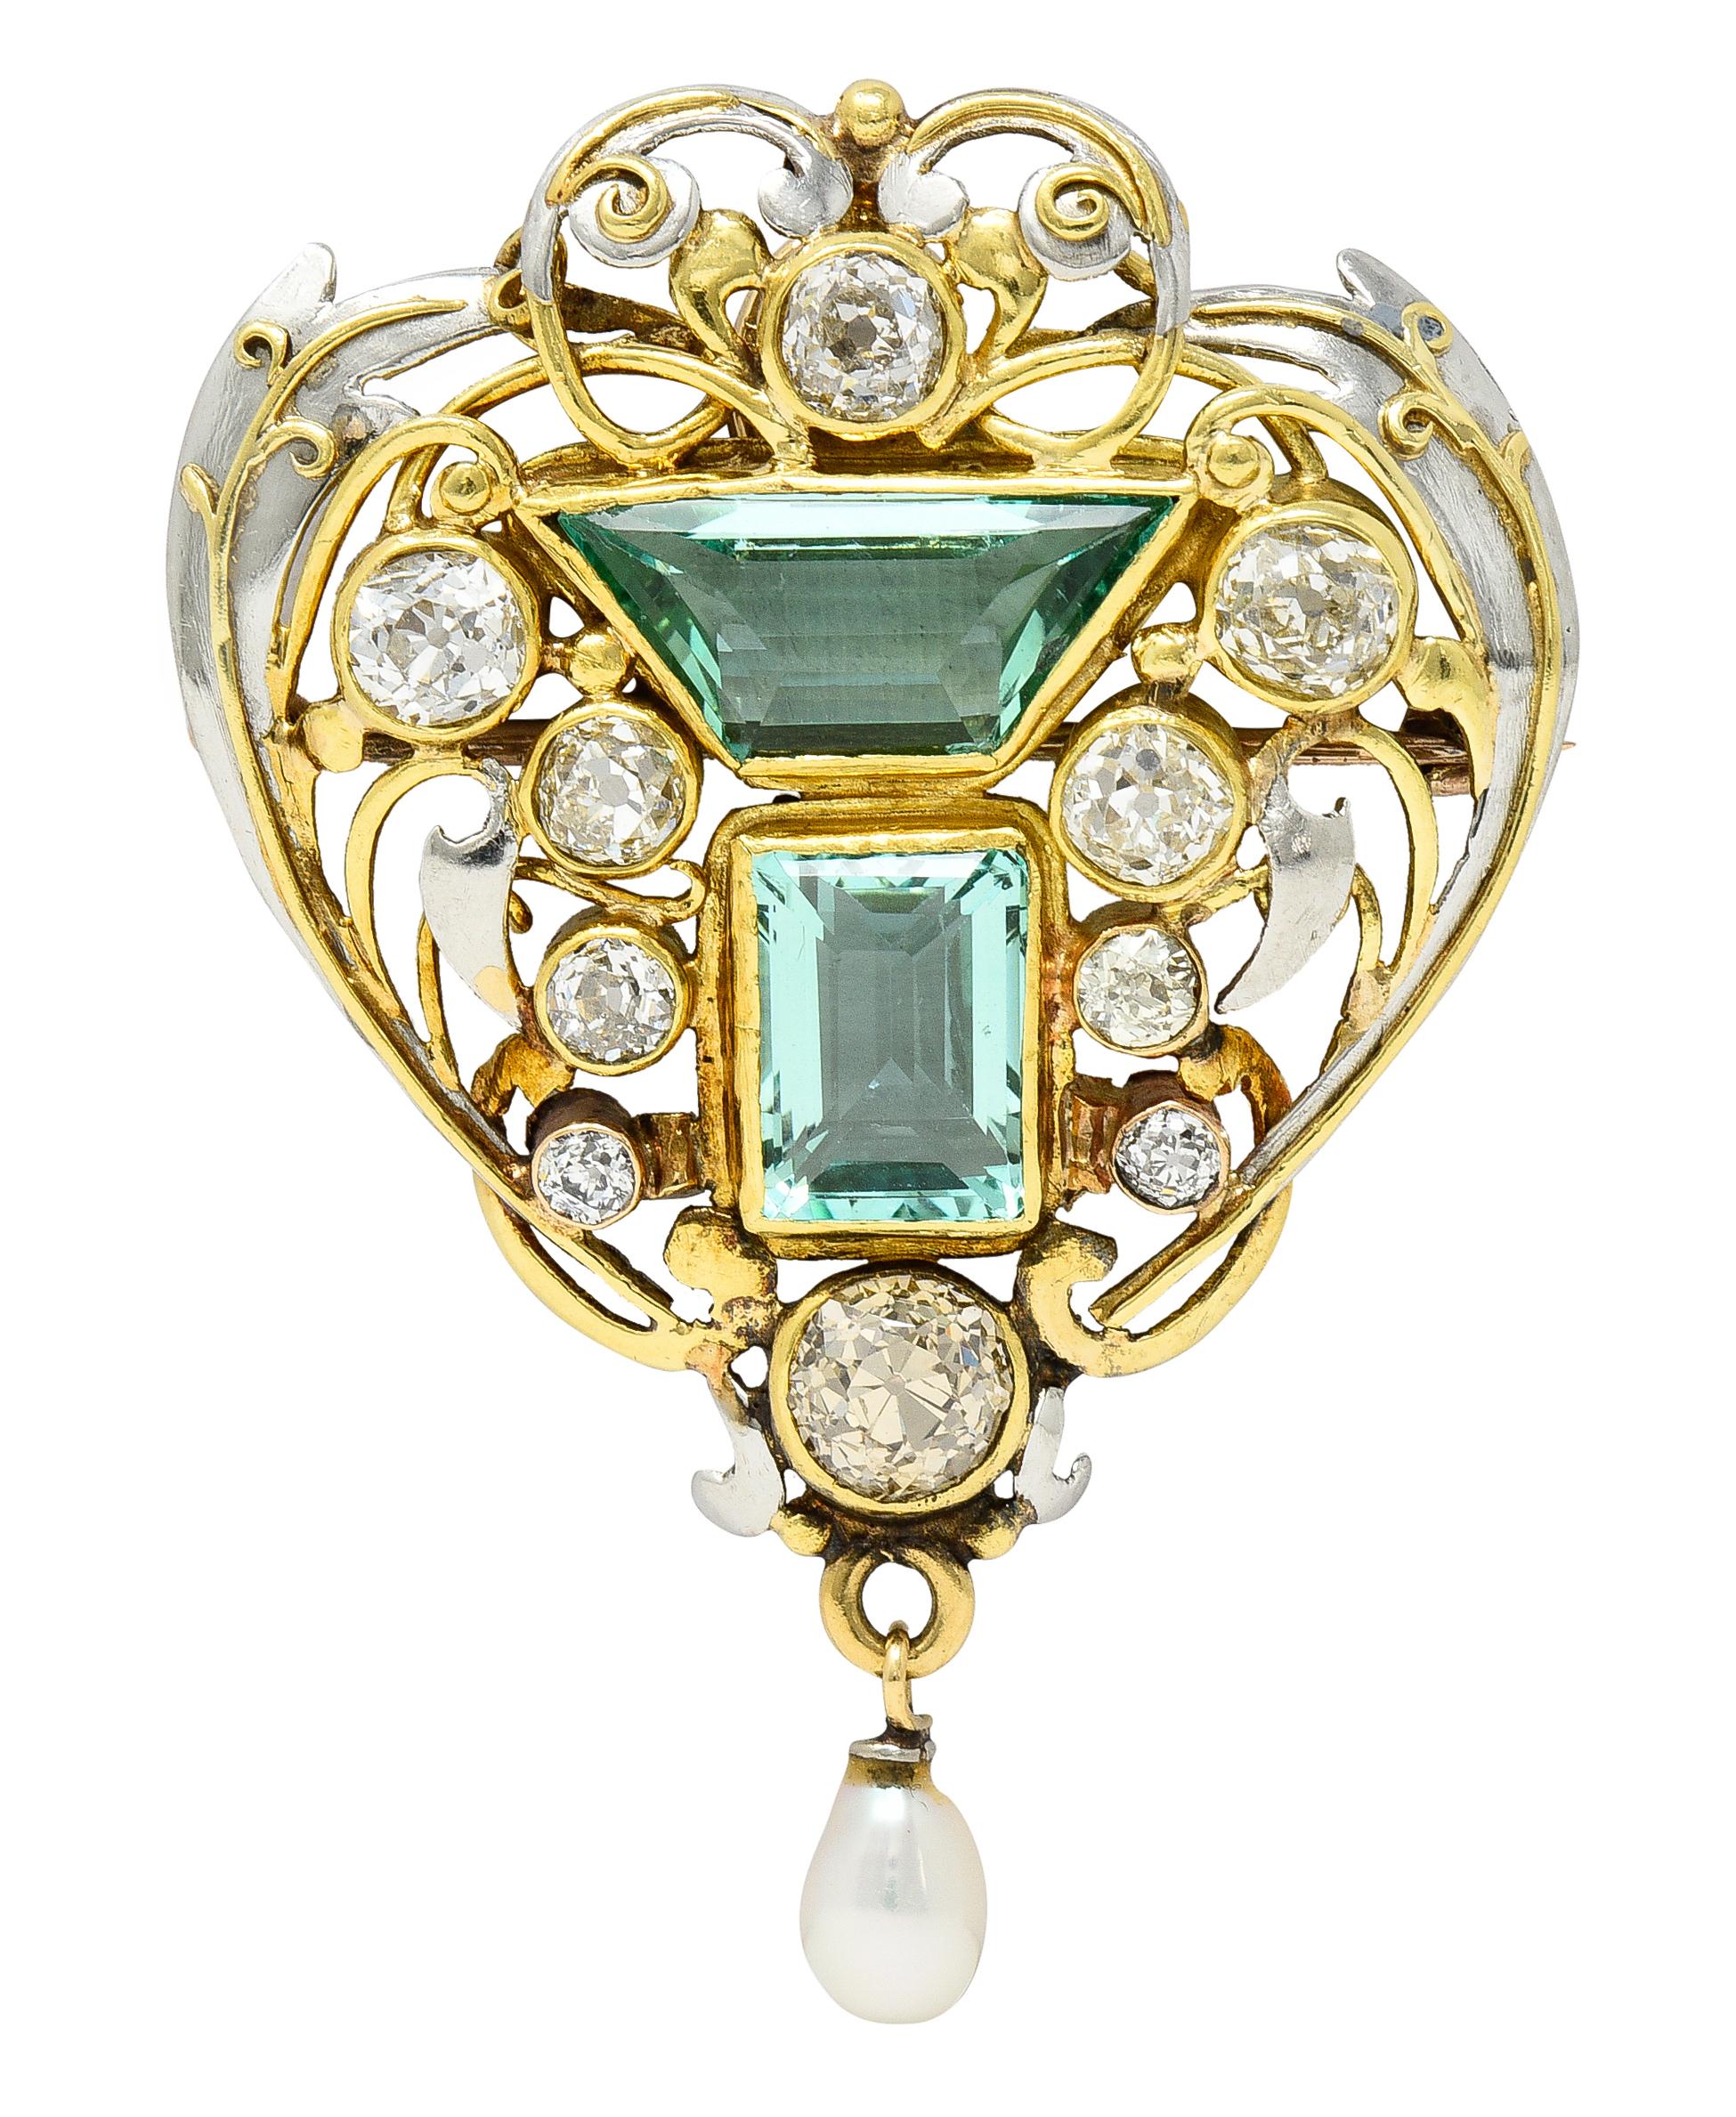 Designed as a platinum and yellow gold pierced foliate motif pendant centering two bezel set emeralds. One is trapezoid-shaped step cut, and the other is an emerald cut - weighing approximately 6.08 carats total. Transparent light bluish-green in